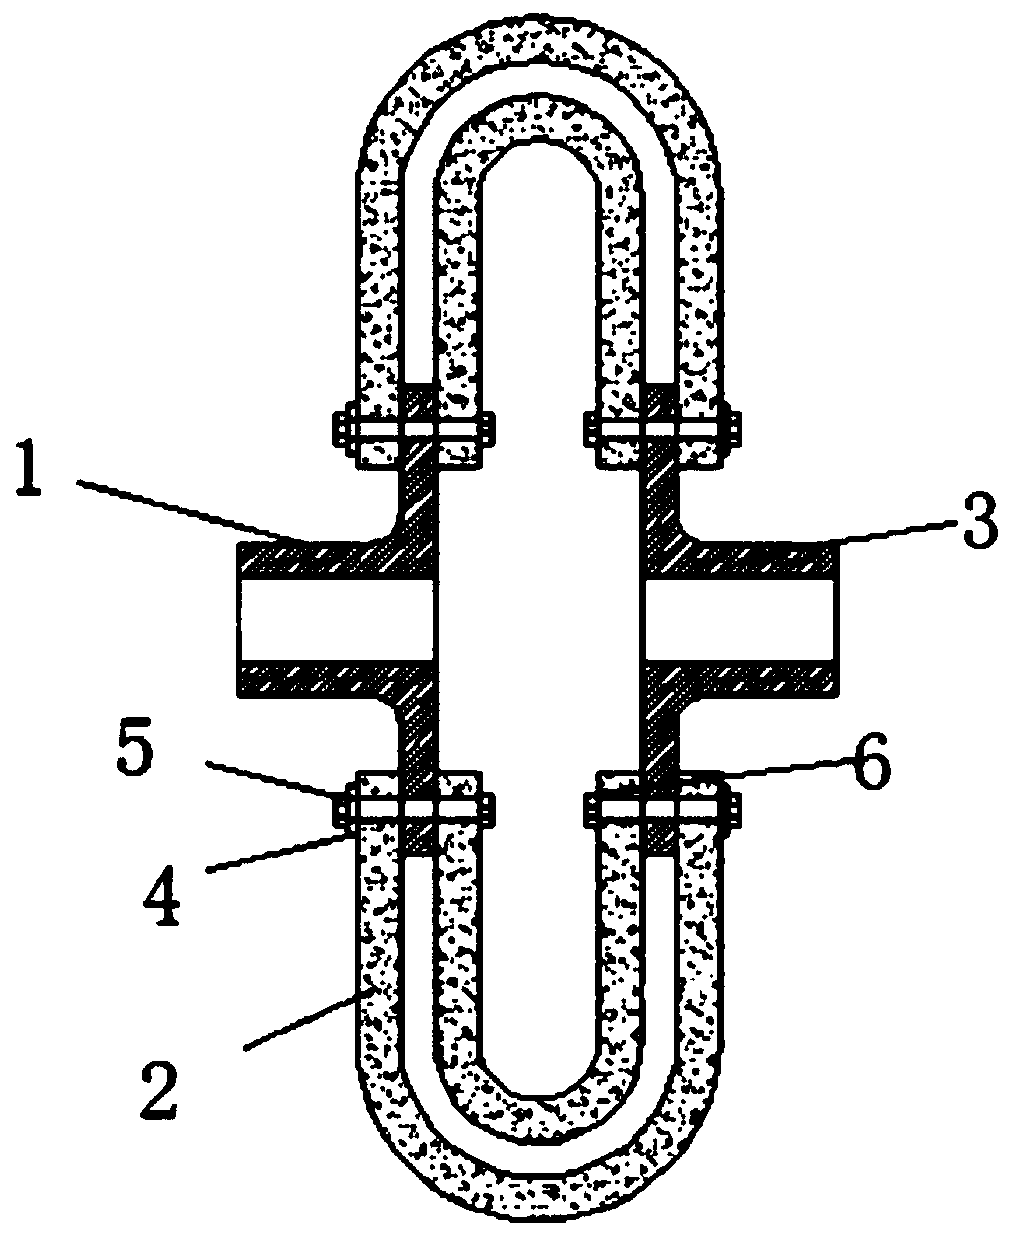 Flexible transmission connecting device